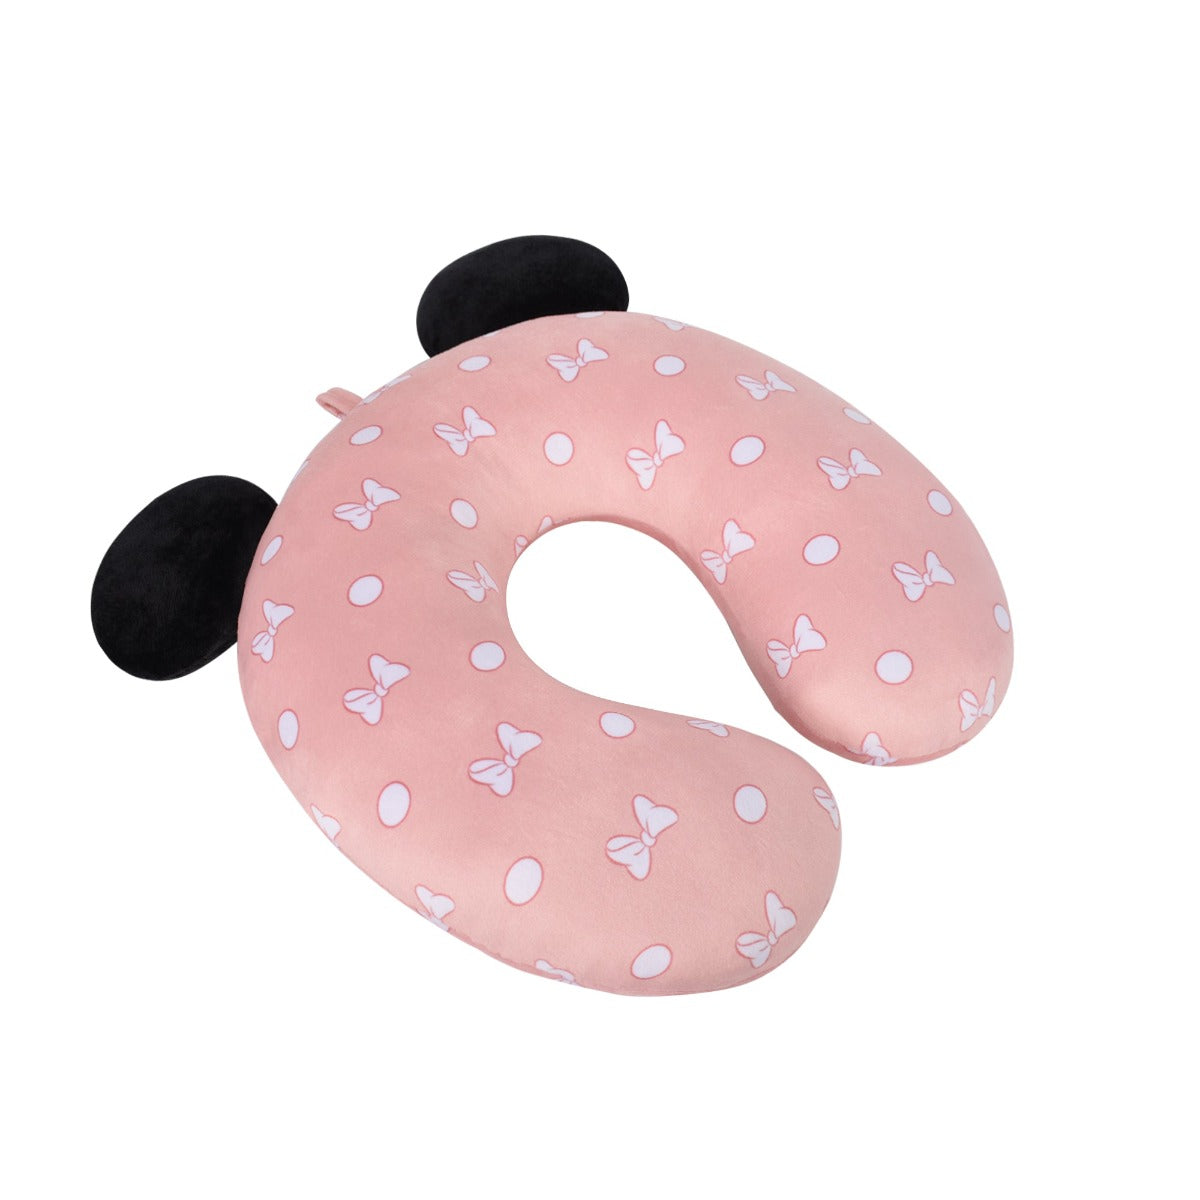 Disney Minnie Mouse Bow With Polka Dots Travel Neck Pillow